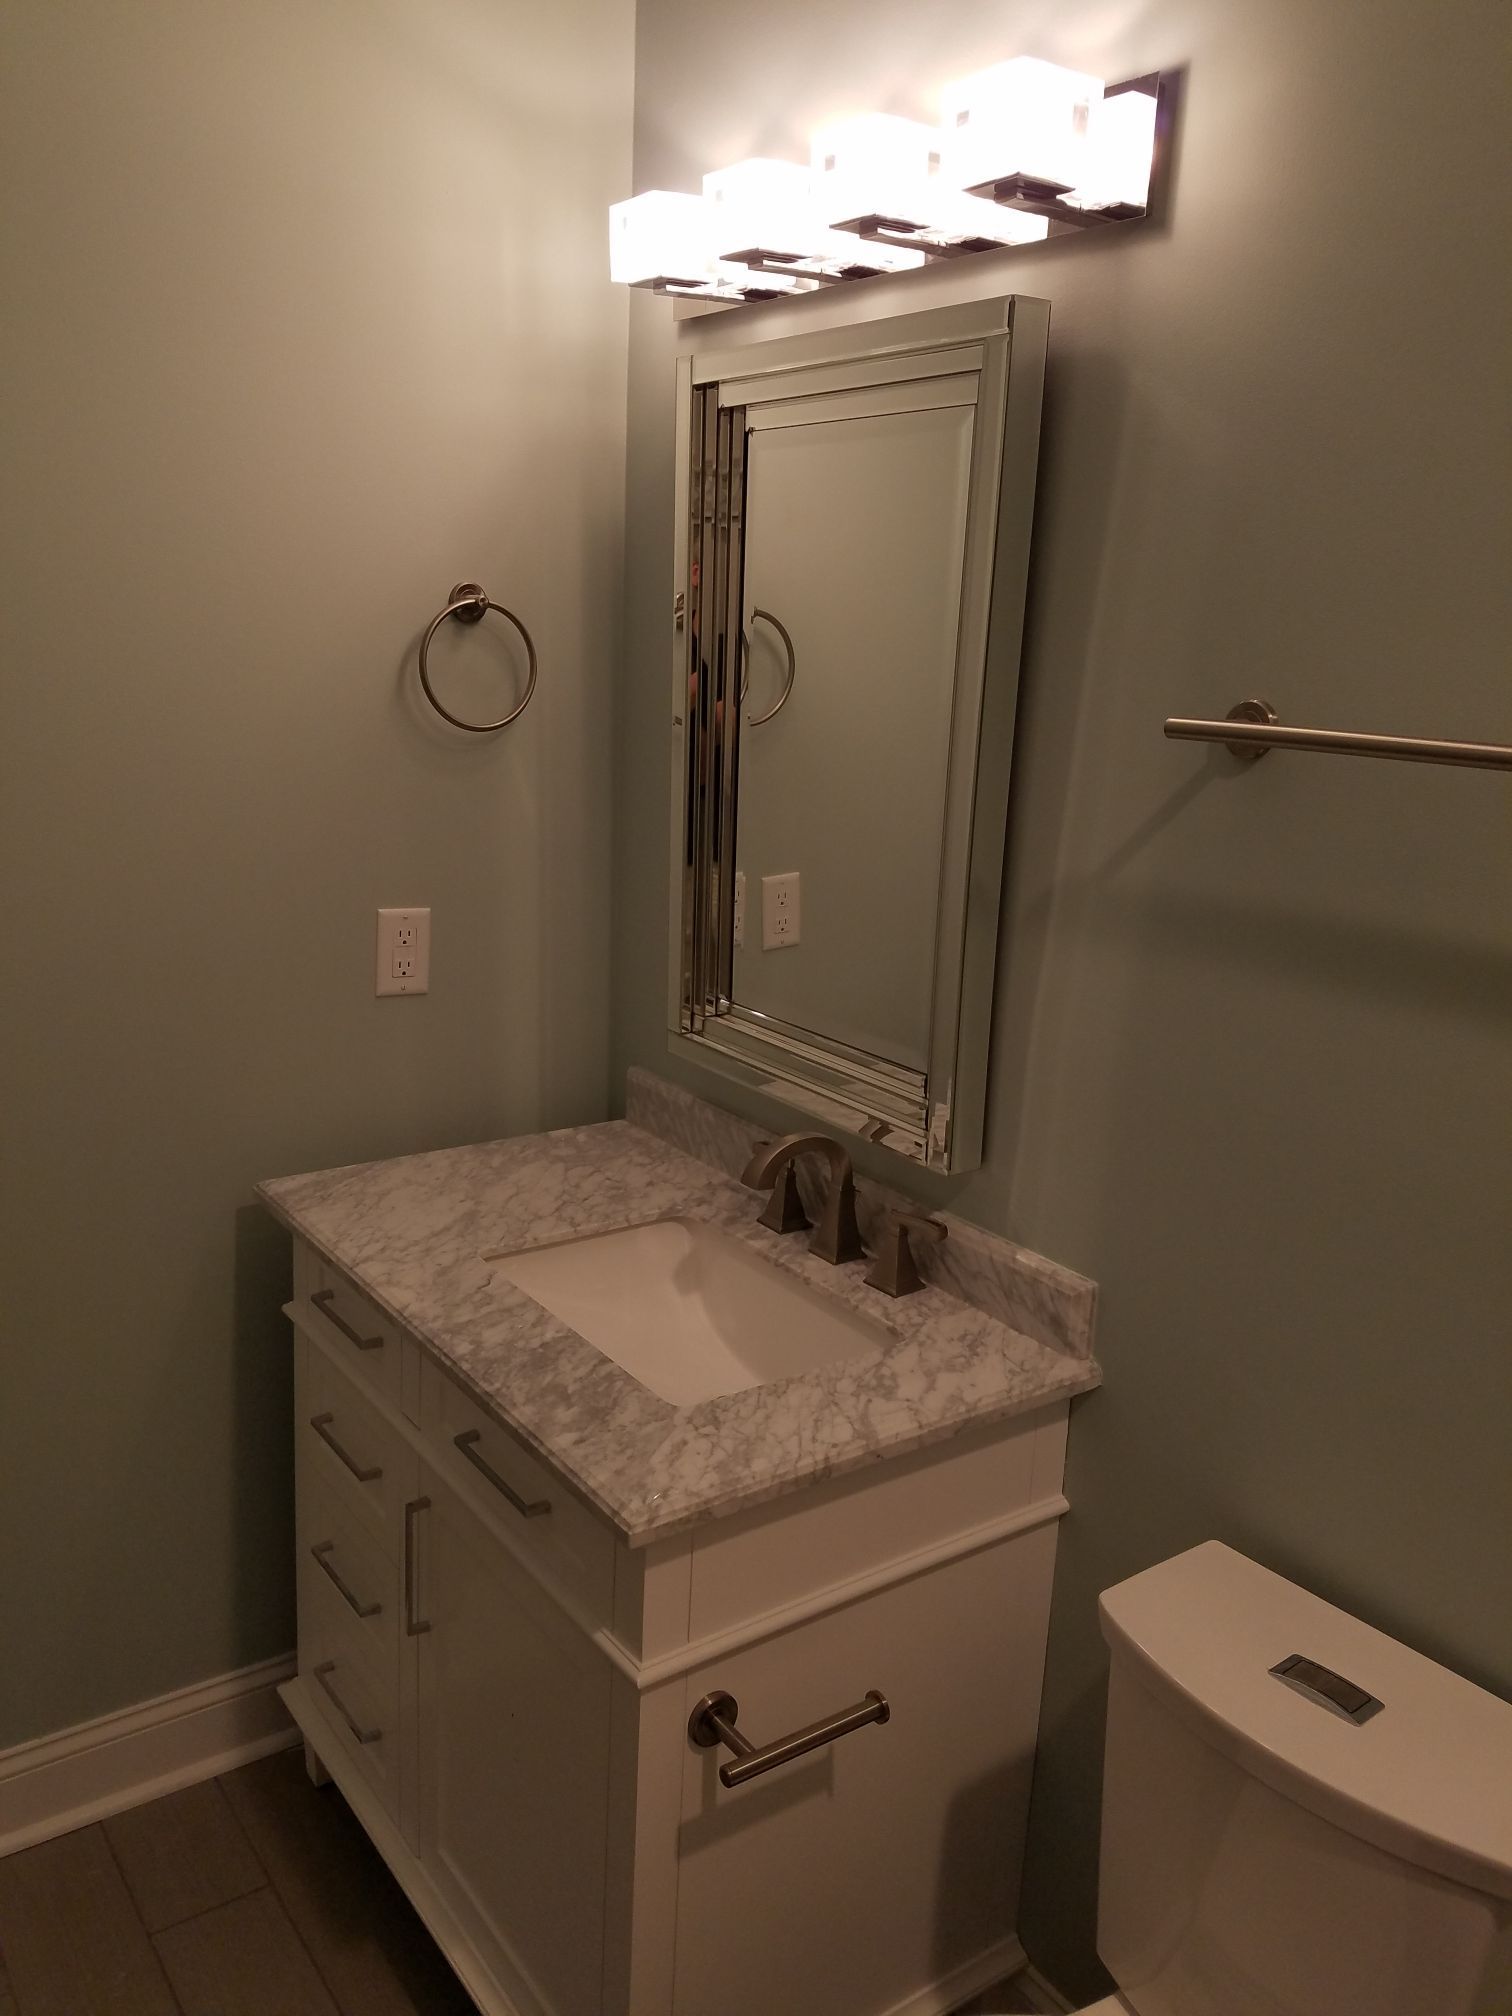 Bathroom Remodel in Cary, NC